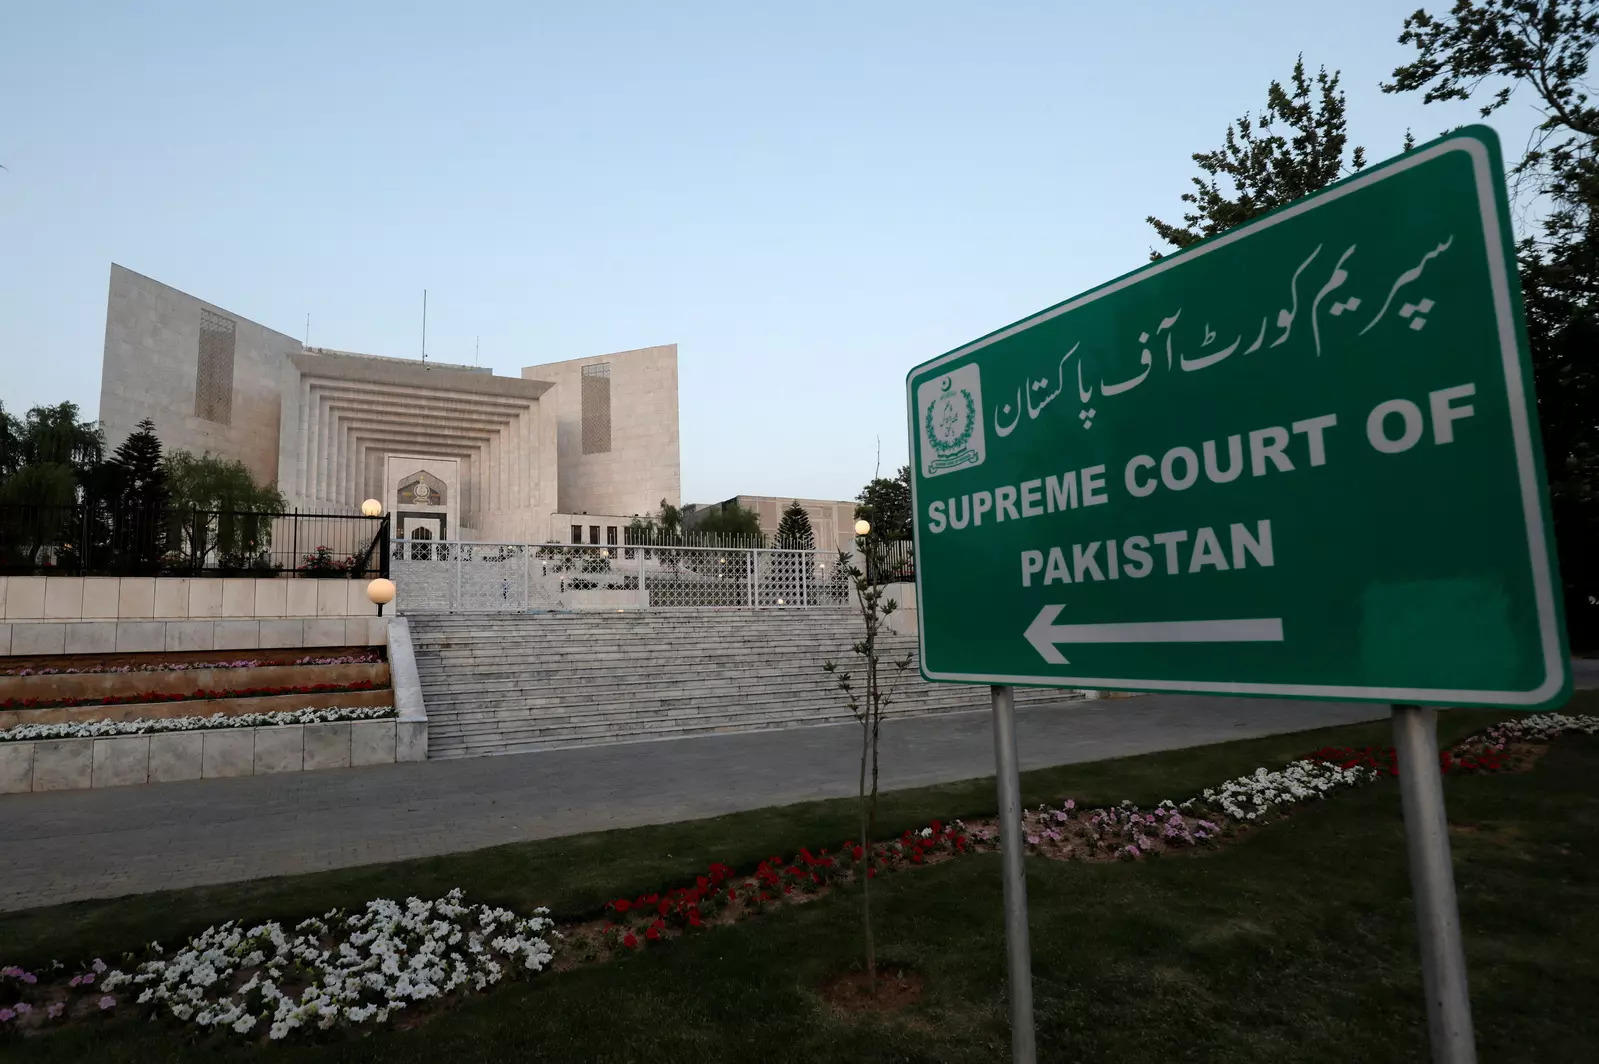 Pakistan Supreme Court to hear dismissal of no-trust vote against PM,  dissolution of Parliament - Times of India